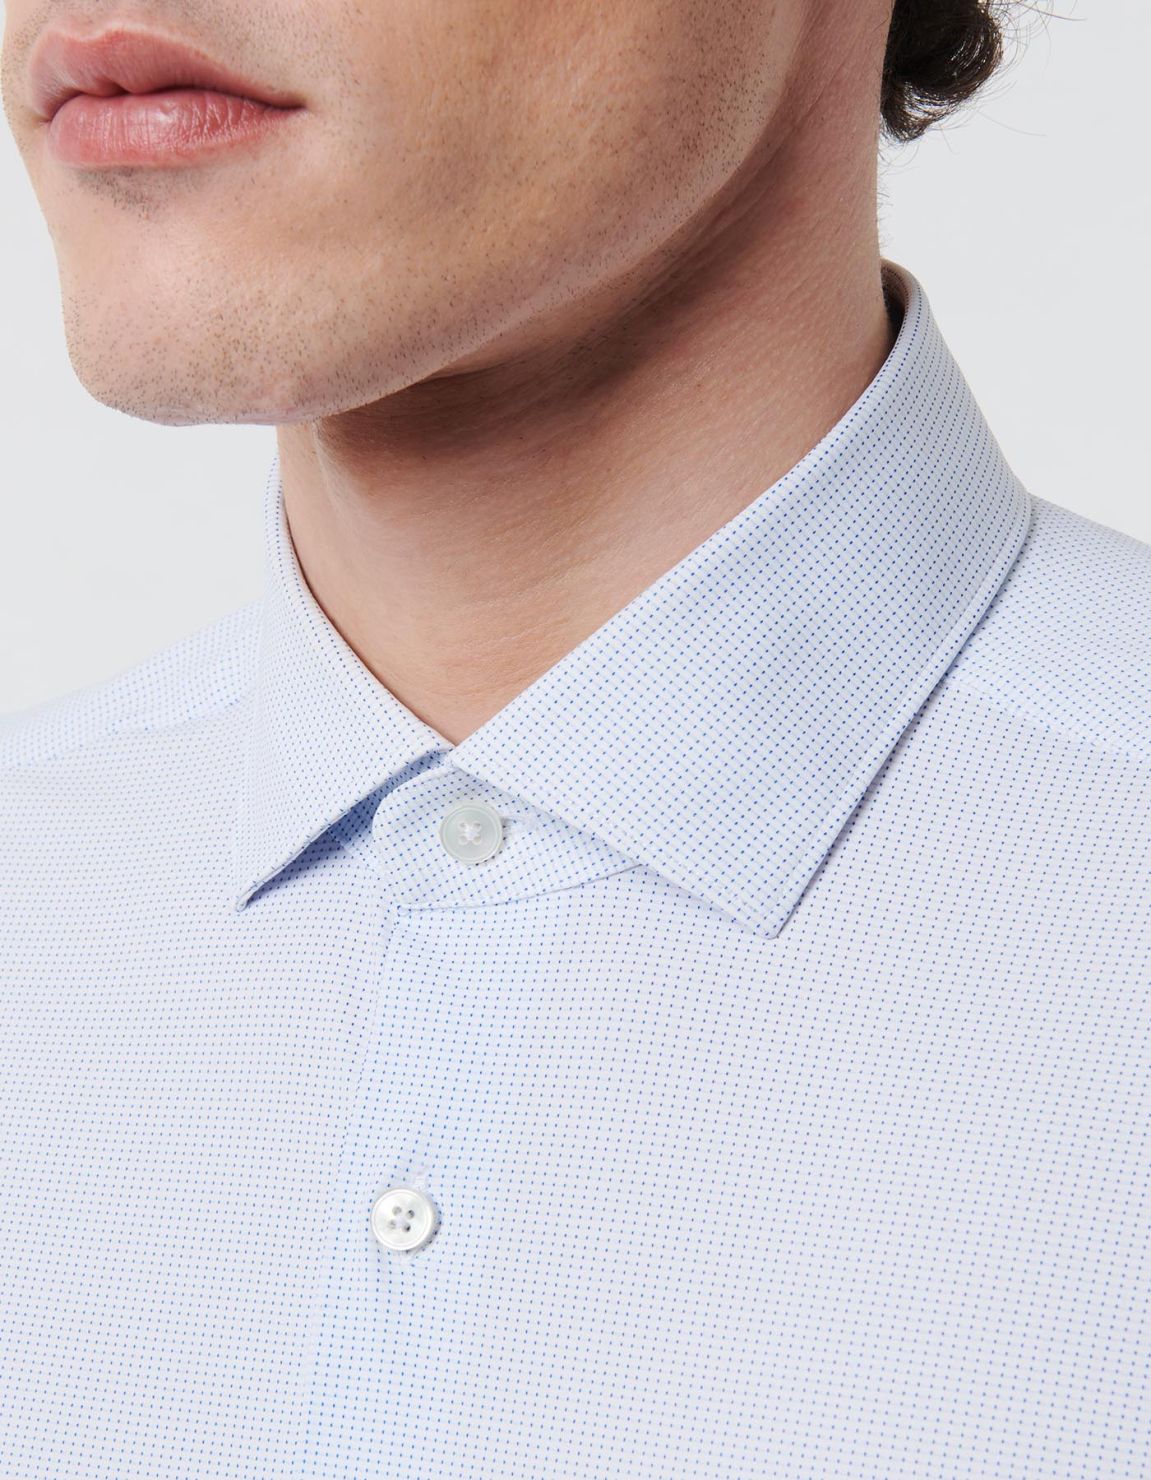 Blue and white Textured Pattern Shirt Collar small cutaway Evolution Classic Fit 2